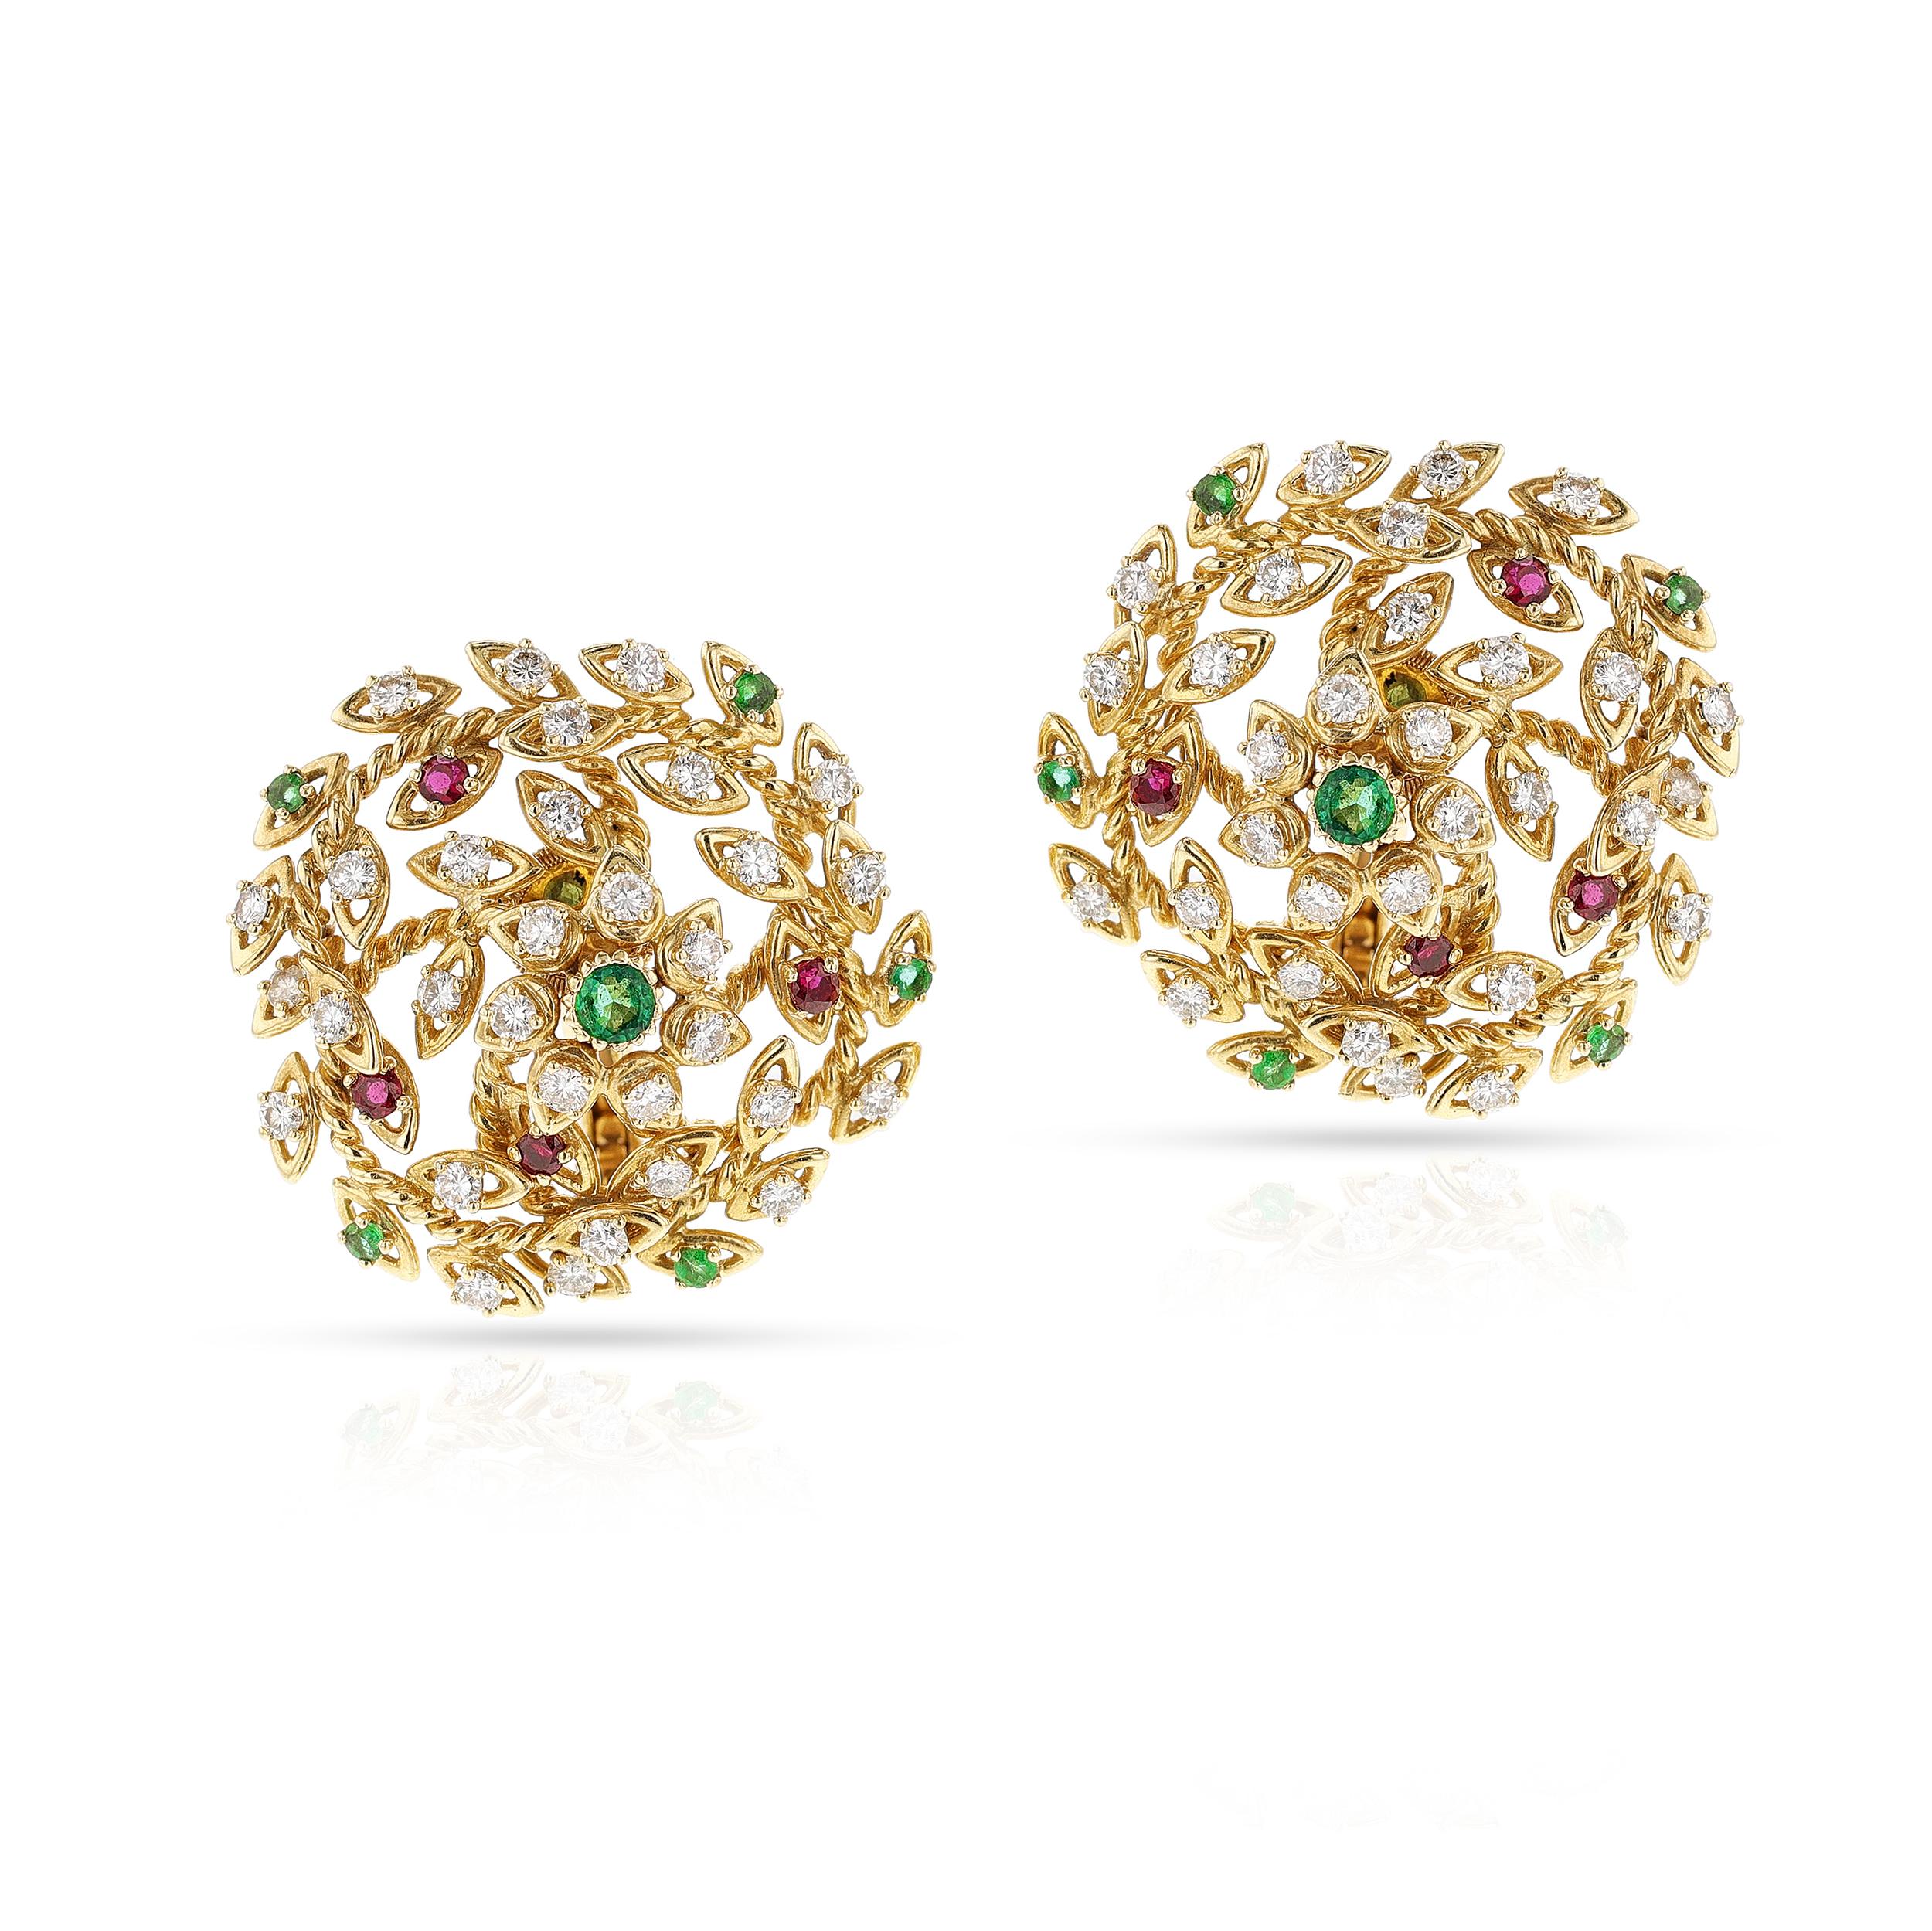 A pair of Cartier Paris Diamond, Emerald and Ruby Earrings made in 18k Gold. Signed and numbered. The diamonds are appx. 3.60 carats, D-E-F color, the center emeralds are appx. 0.50 cts. total, accented with small emeralds and rubies. The diameter